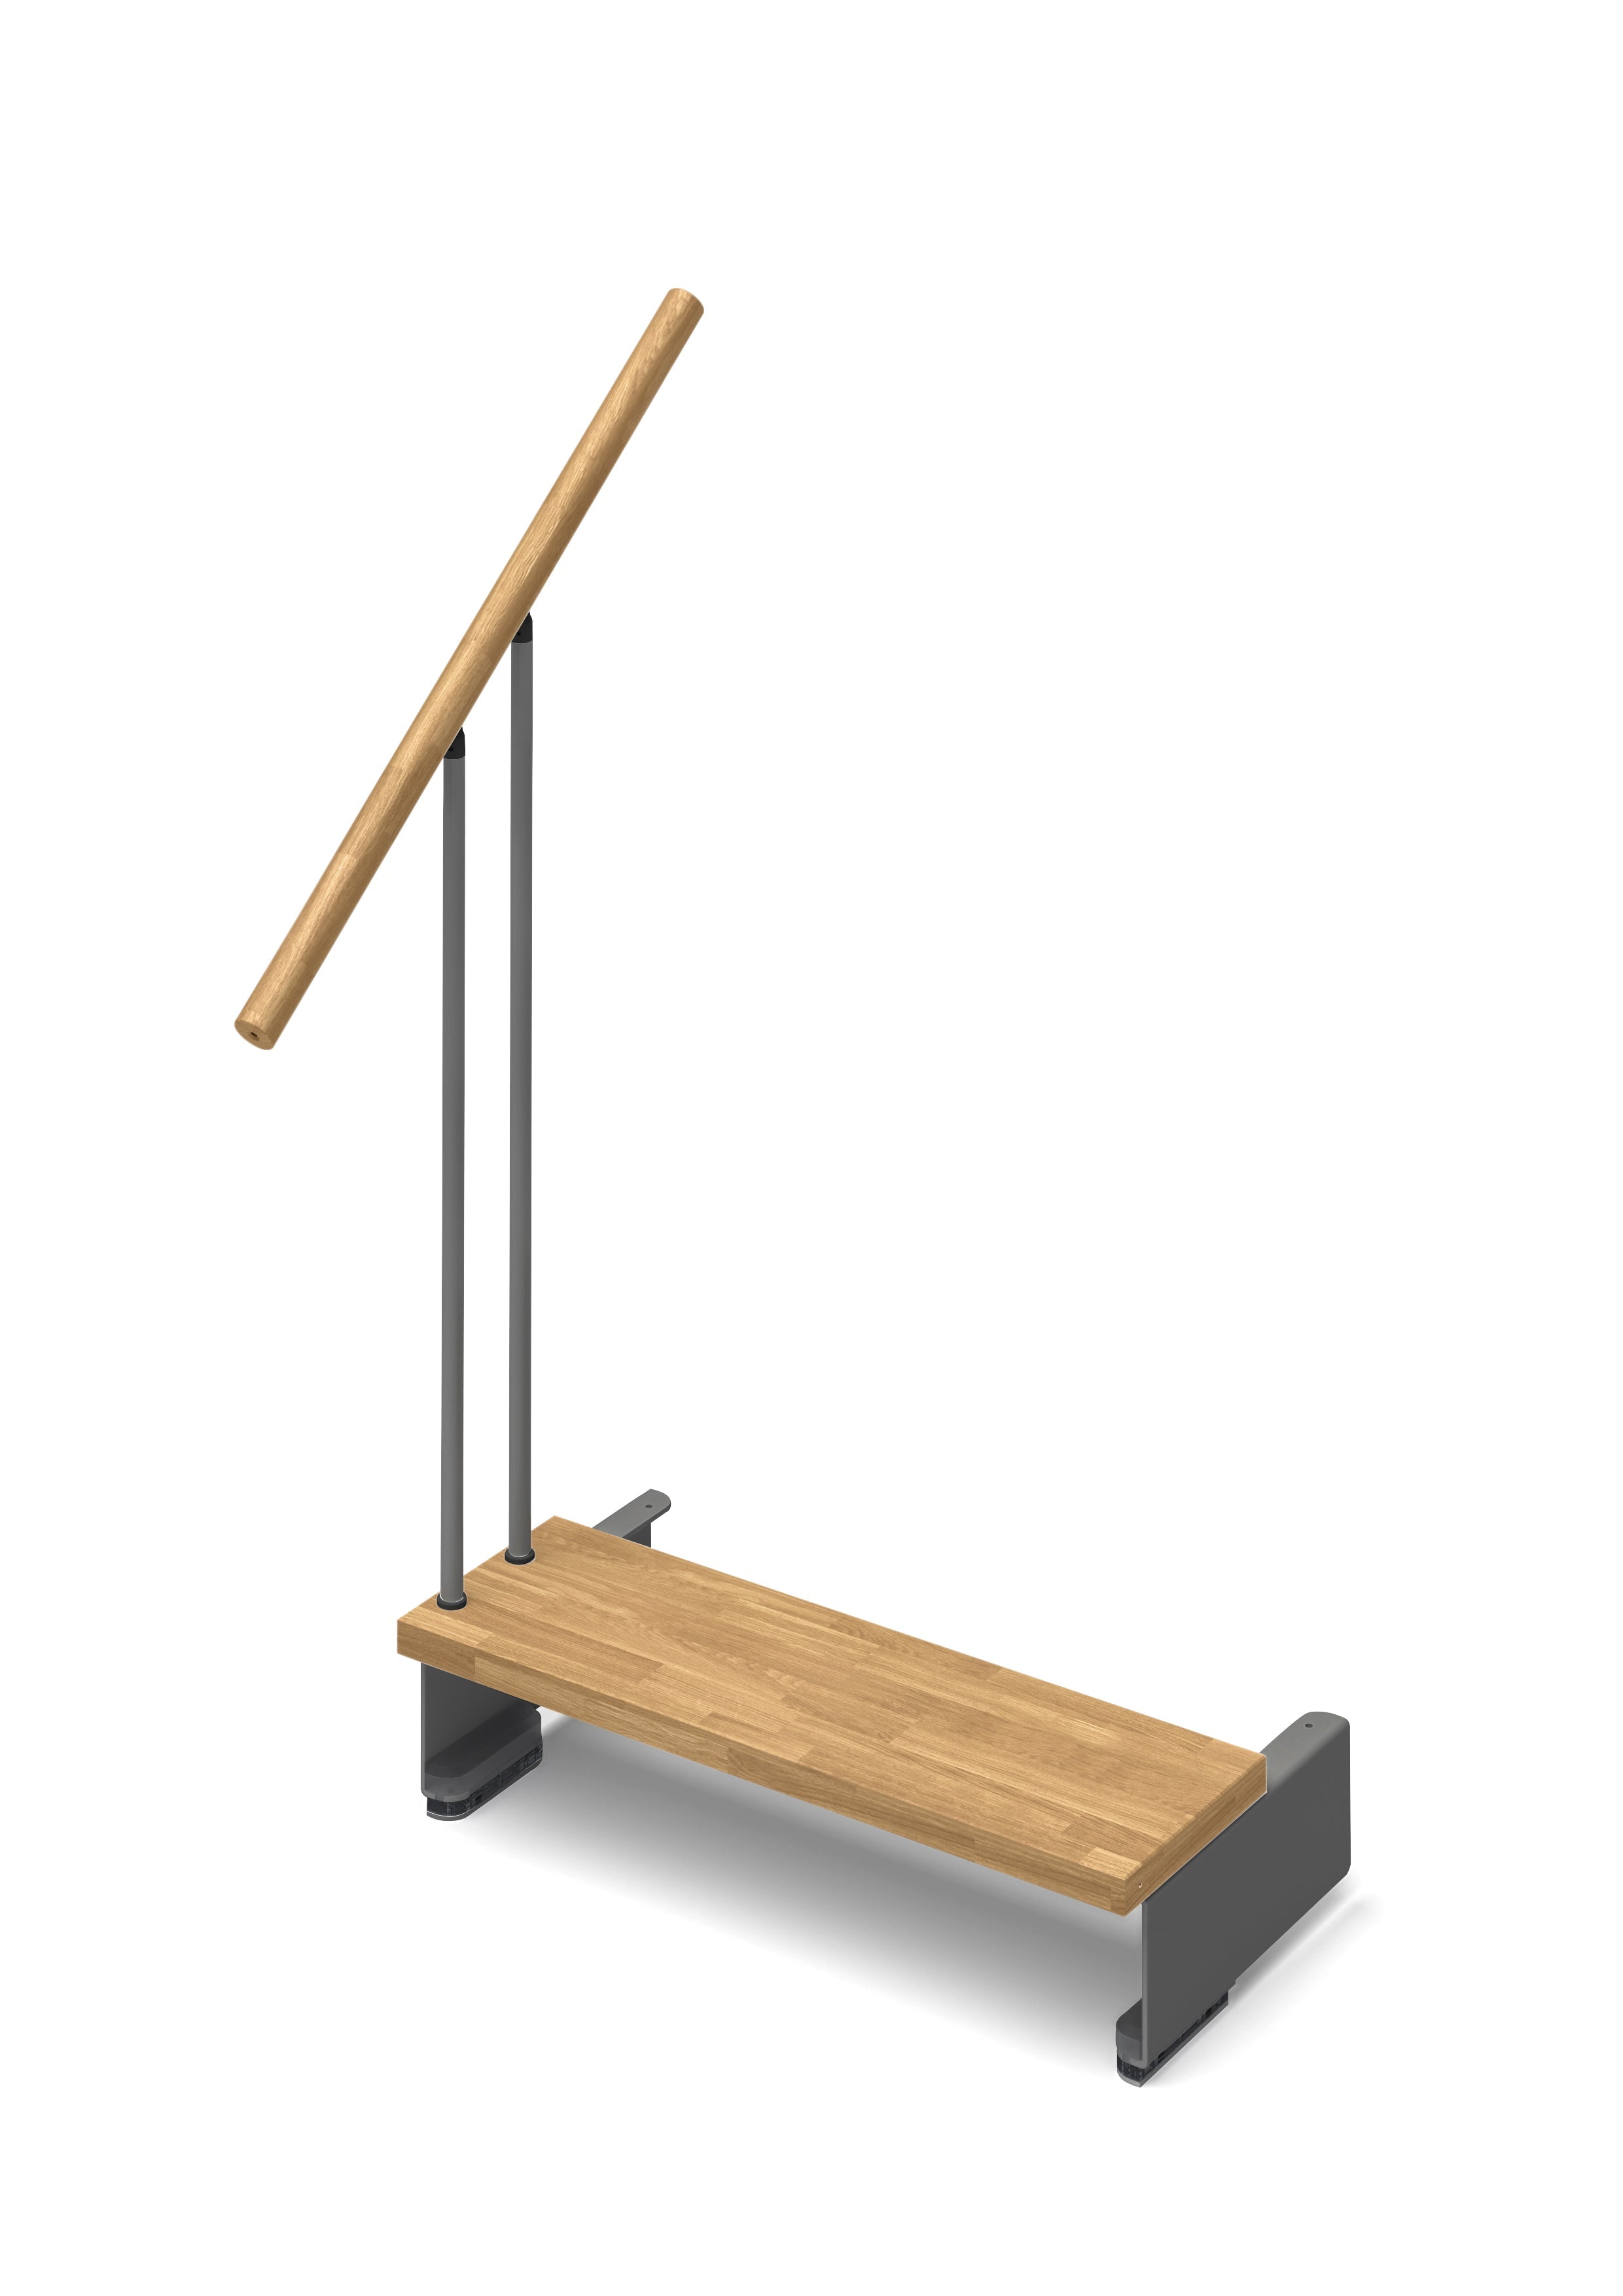 Additional step Adapta 94cm (with structure and railing) - Natural 12